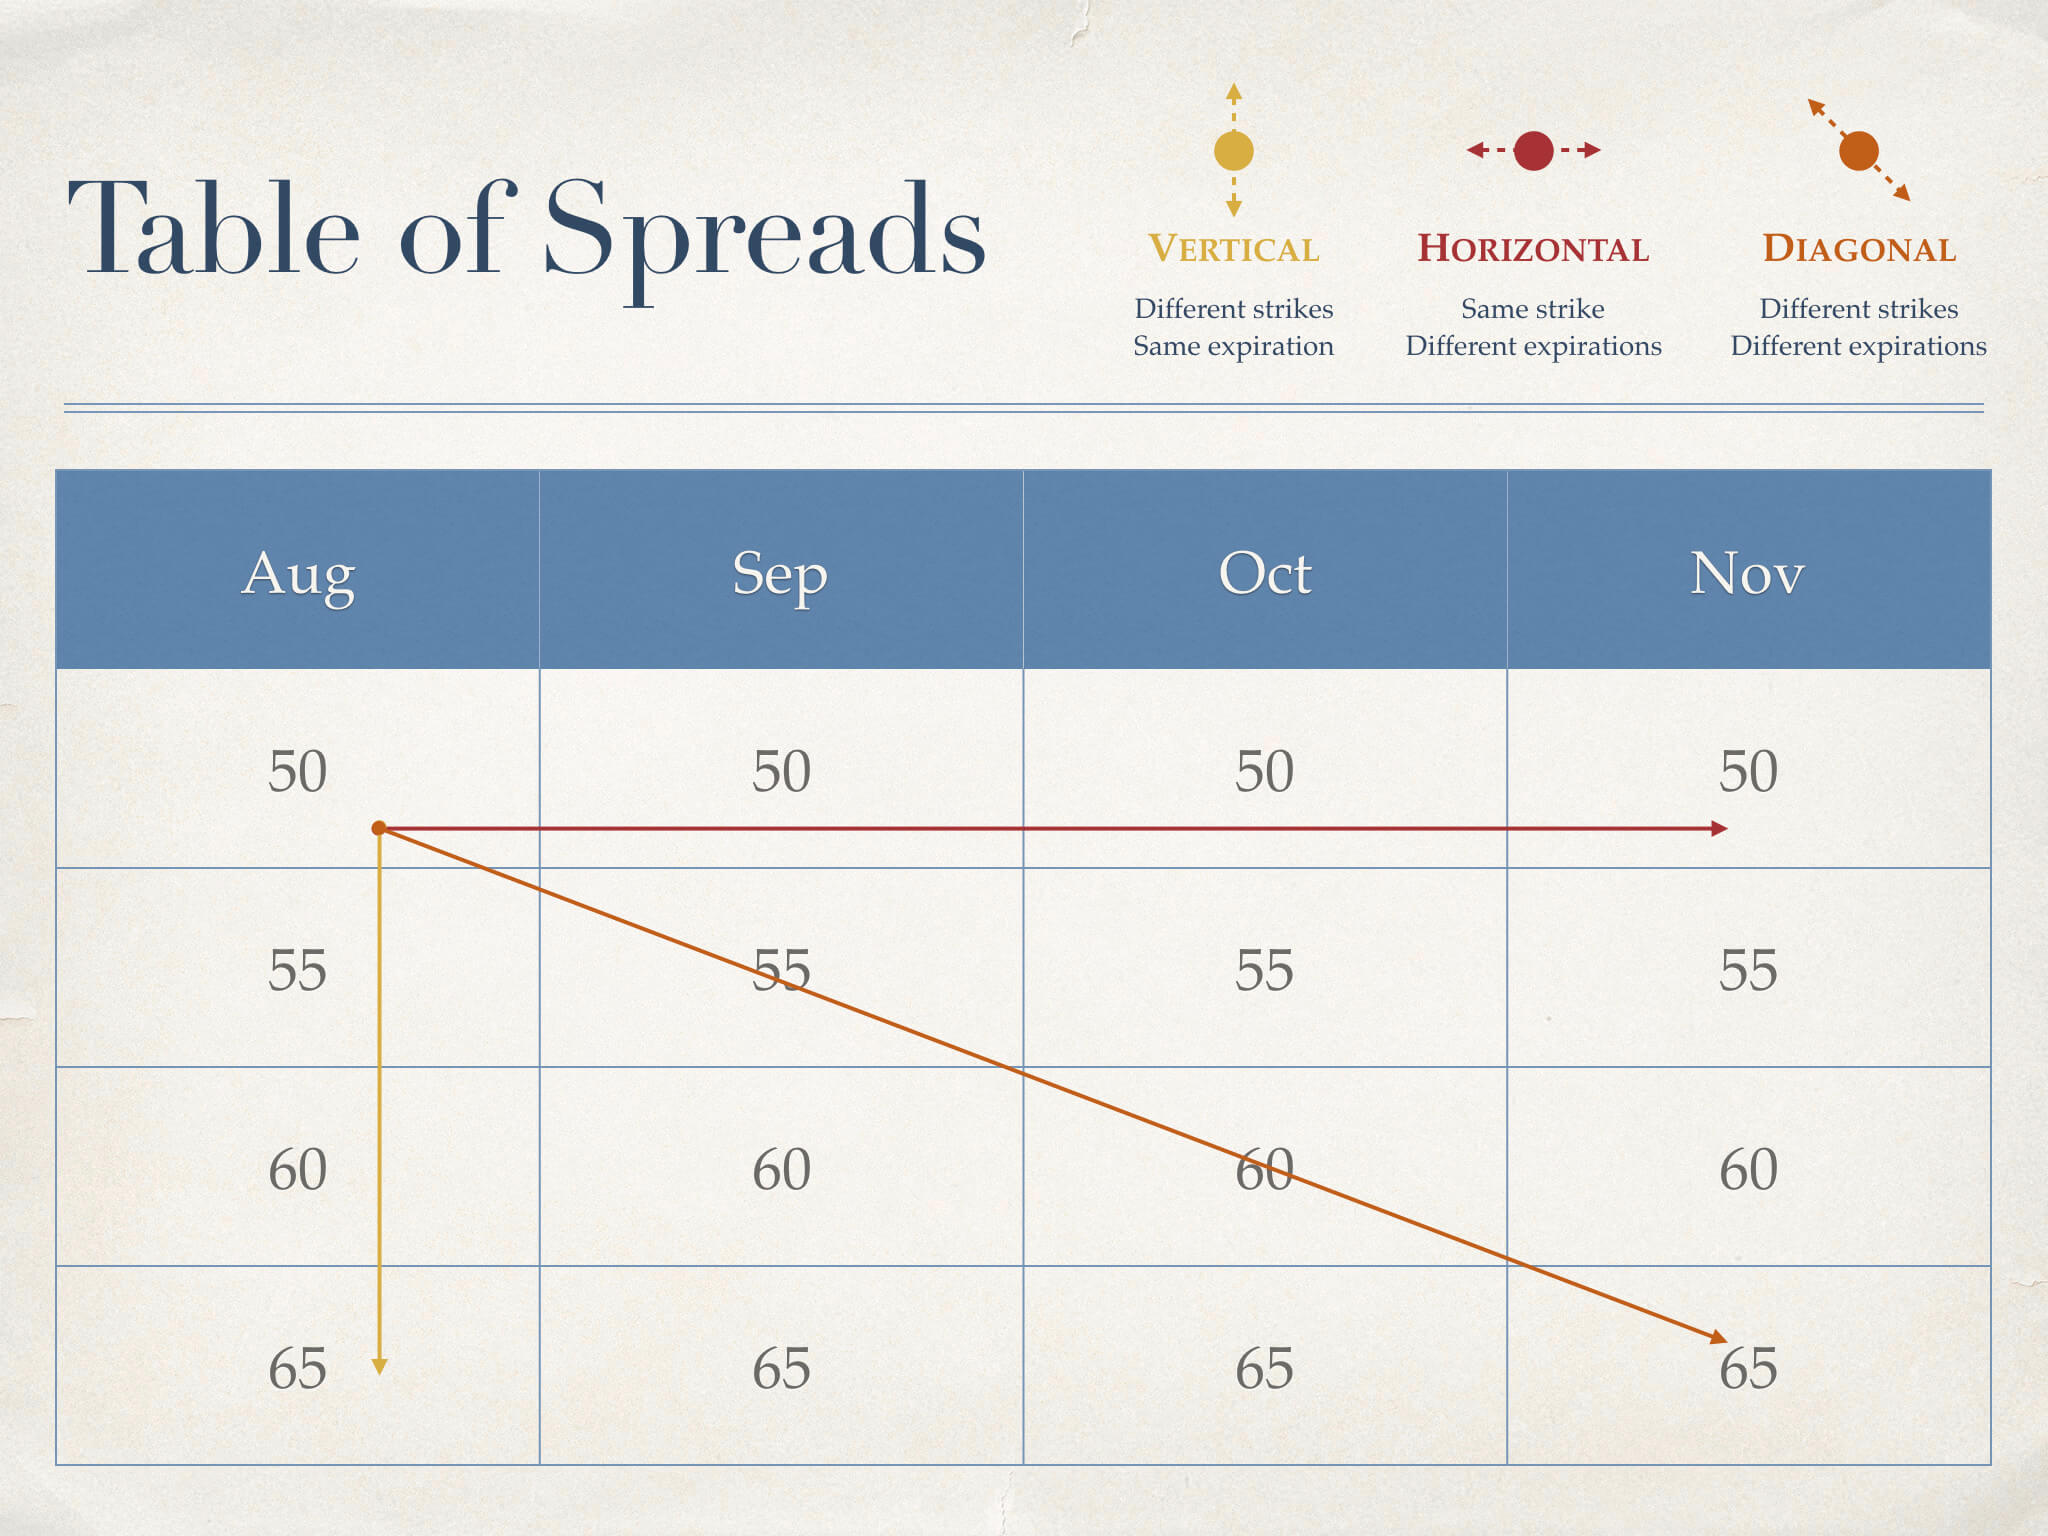 (Infographic) Table of Options Spreads: Vertical Spreads, Horizontal Spreads and Diagonal Spreads. Source: Micah Brooks, redesigned by Christian Sisson